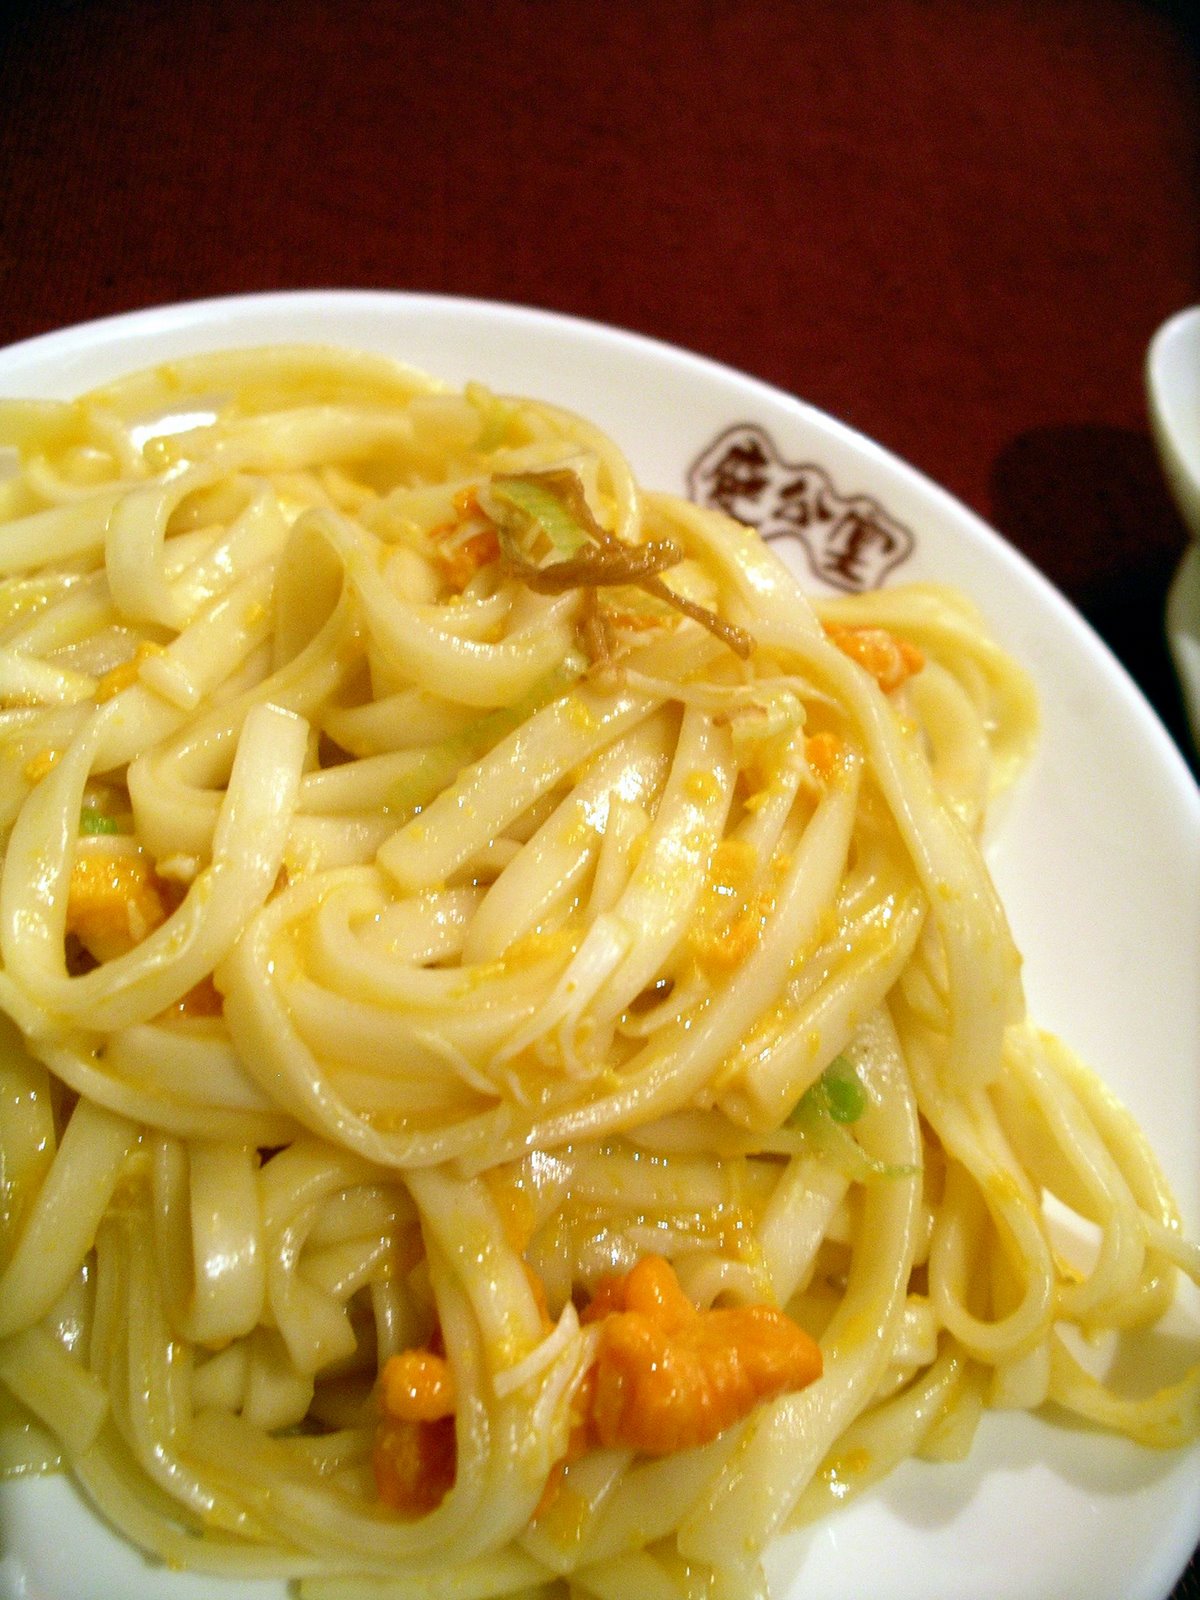 [Stir-fry+Udon+with+Crabmeat+&+Crab+Roe1.jpg]